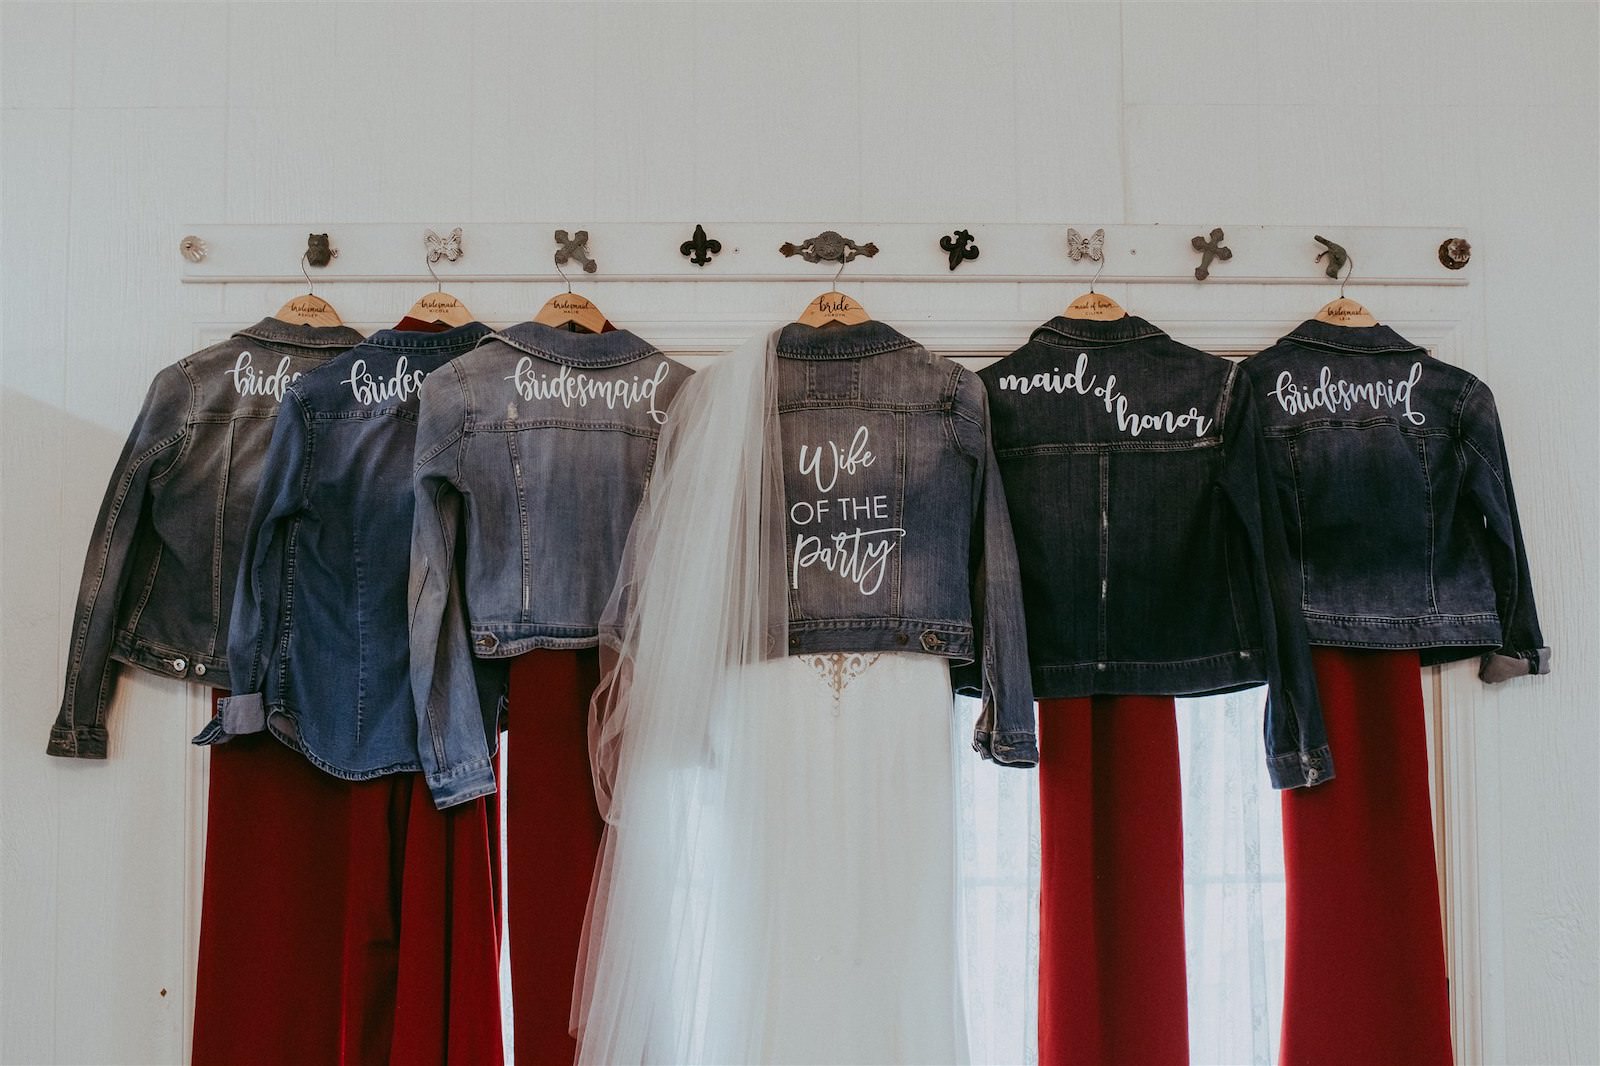 Custom Denim Jean Jackets for Wedding Bridal Party | Burgundy Maroon Deep Red Bridesmaid Dresses | Bride Jacket Wife of the Party